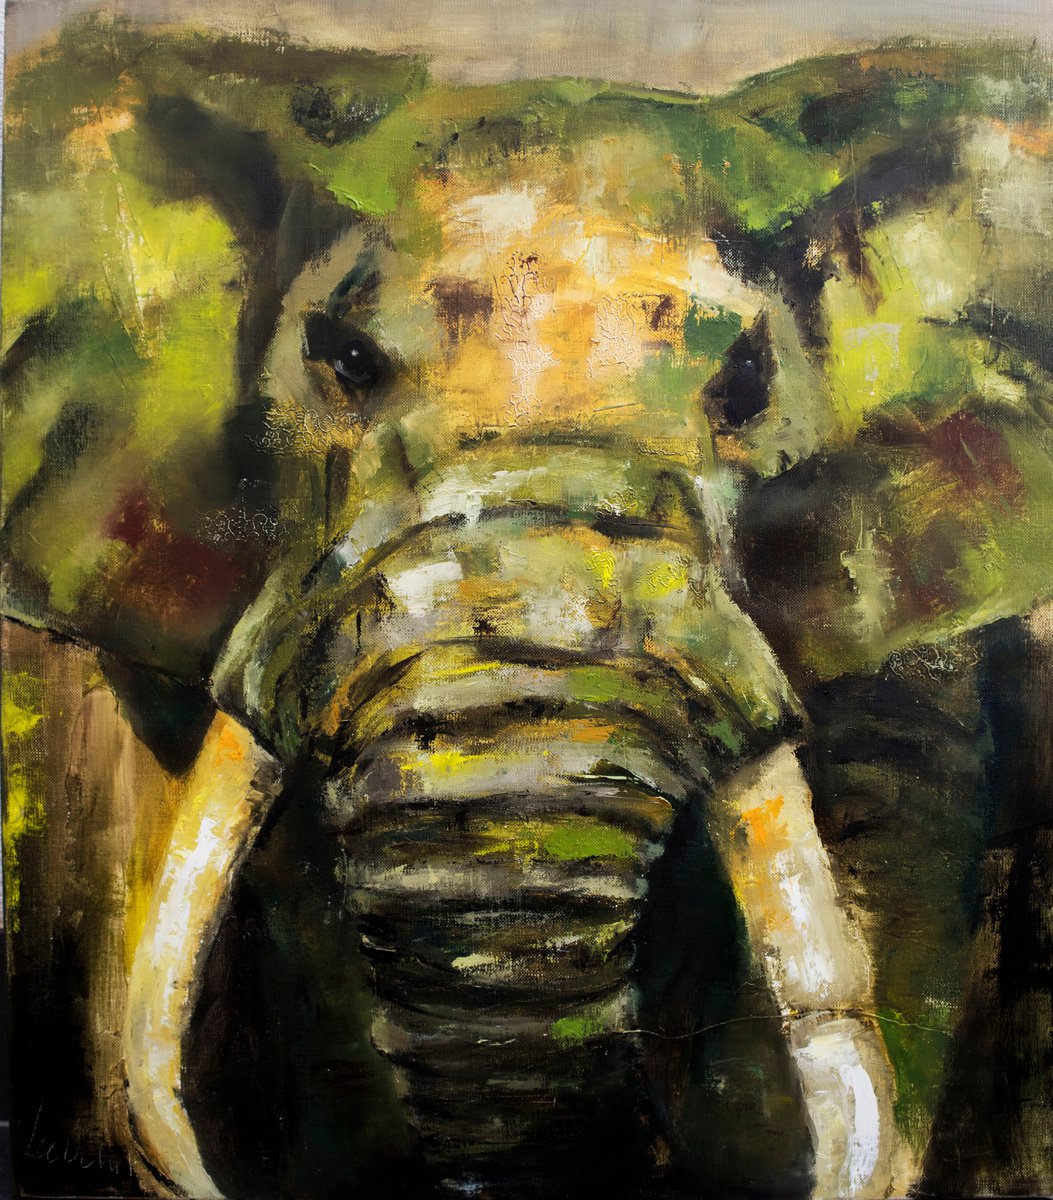 Elephant painting oil by Anna Lubchik